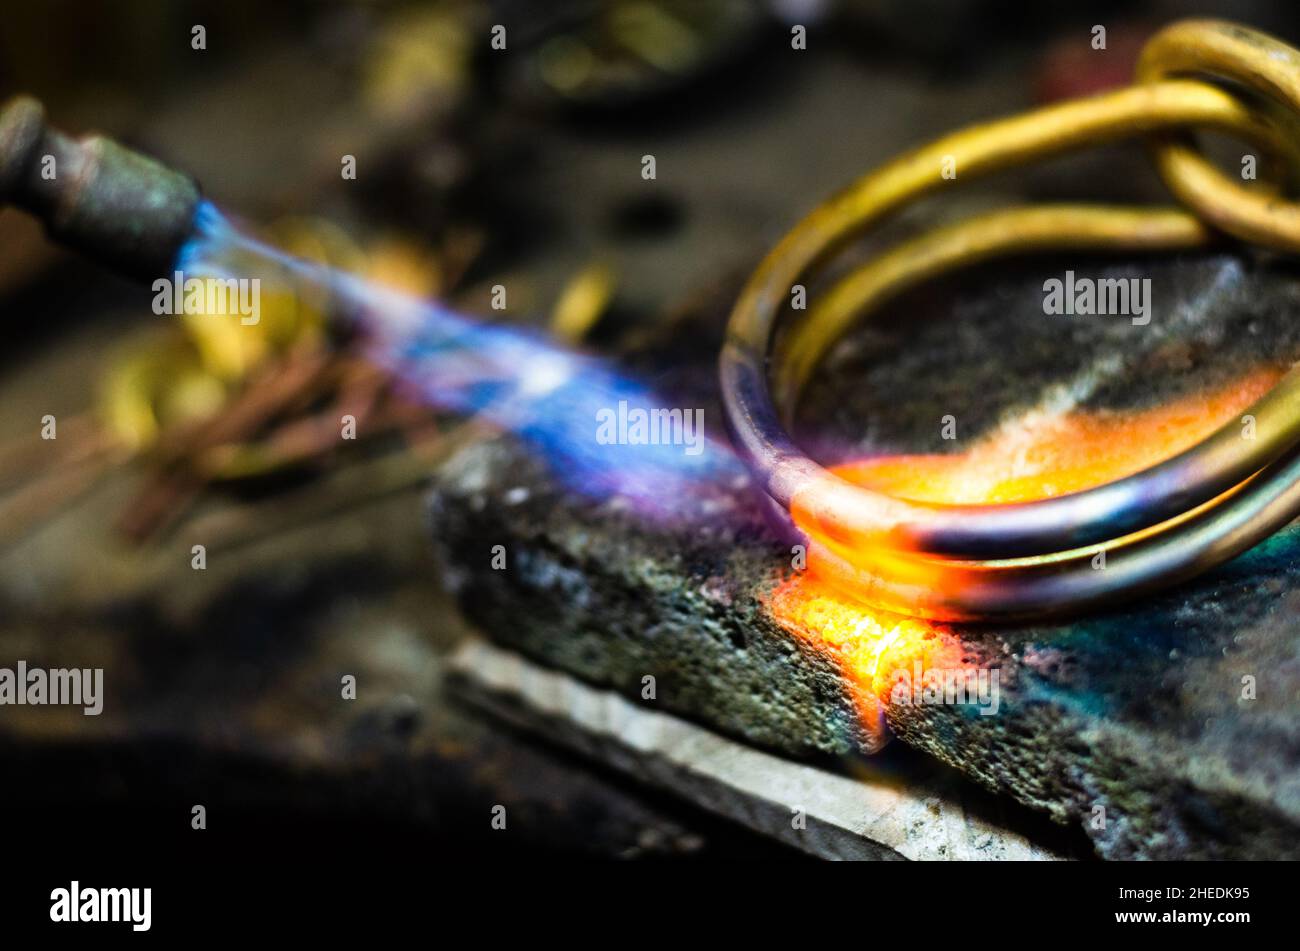 Craft Jewelry Torch Flame Against Dark Stock Photo 1441772360